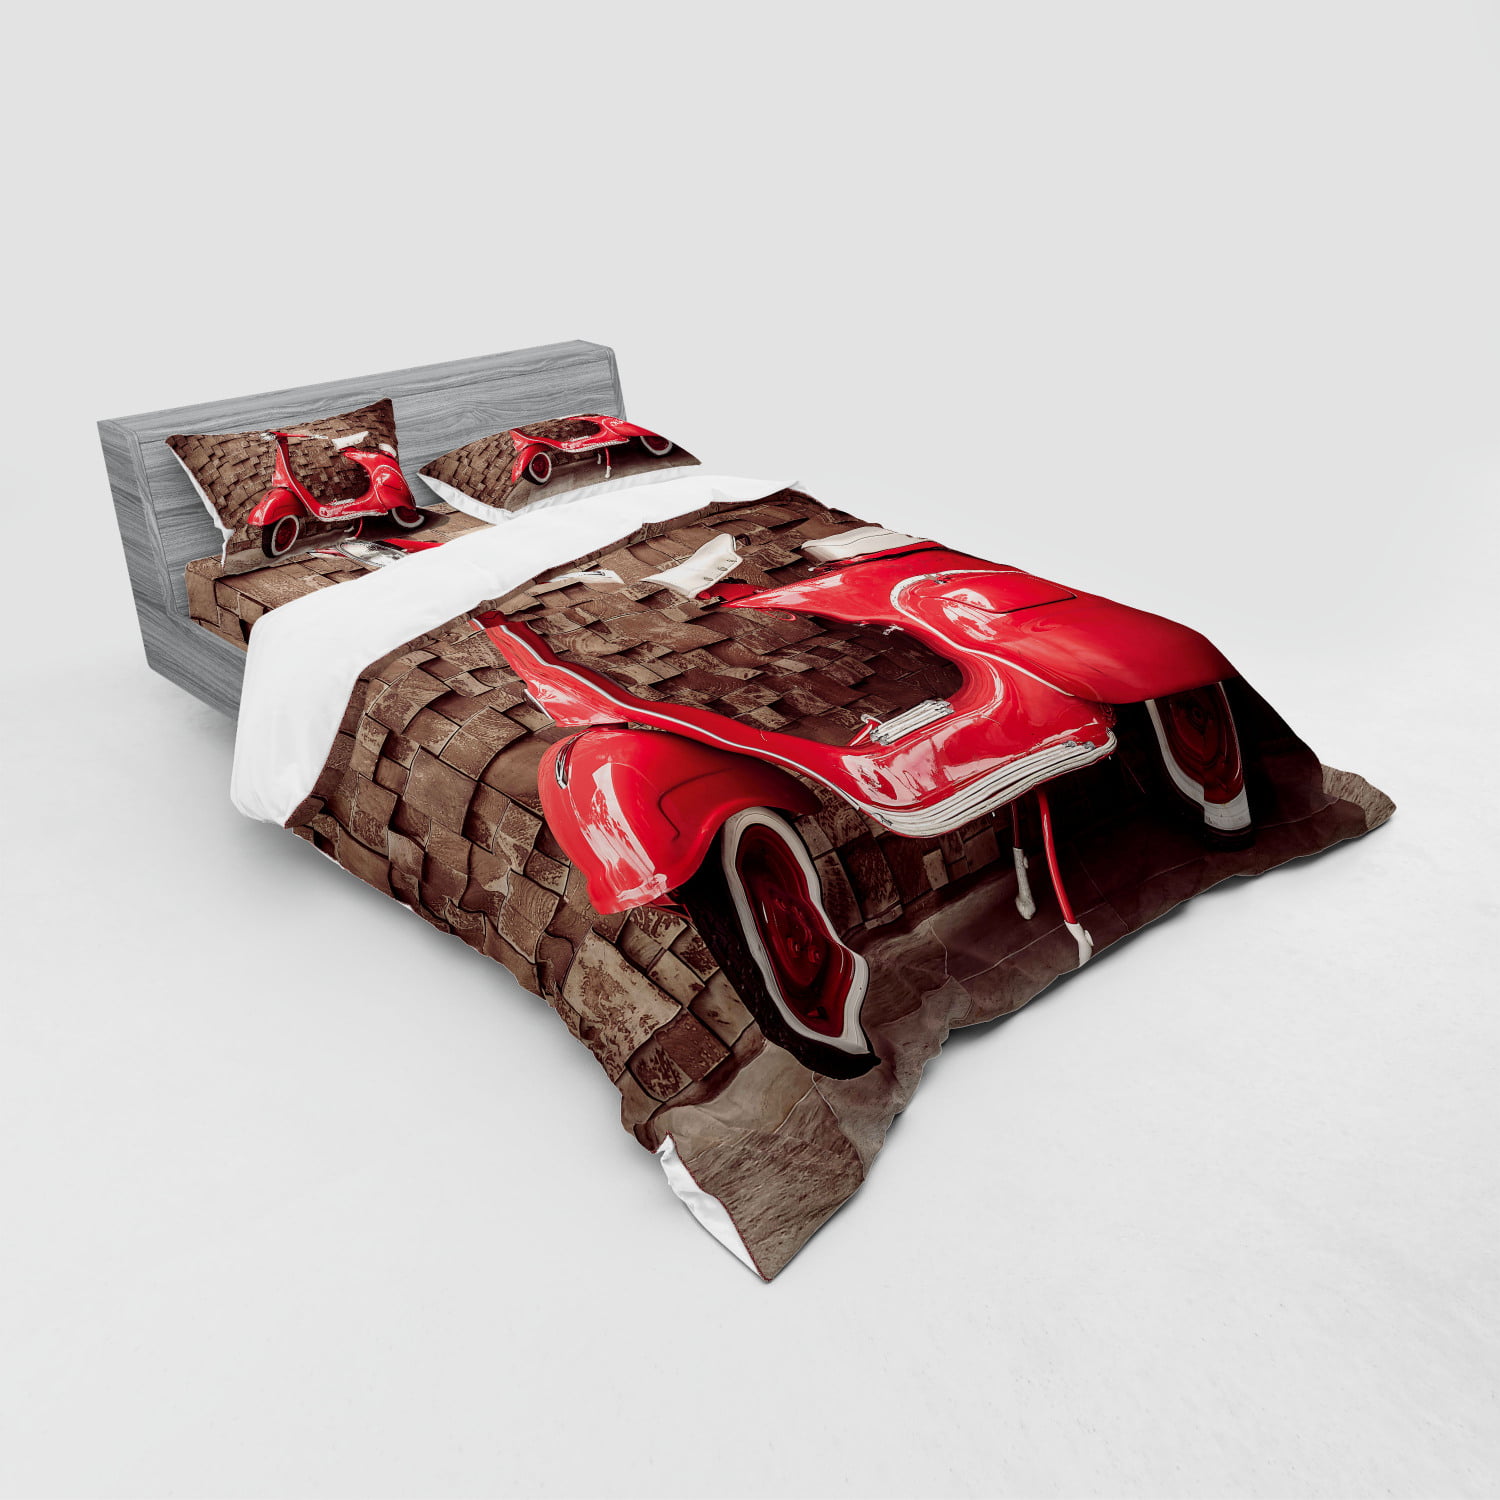 Red Umber Twin Size Retro Motorcycle Nostalgic Scooter in Front of Wall Vehicle Traffic Urban Picture Soft Comfortable Top Sheet Decorative Bedding 1 Piece Ambesonne Vintage Flat Sheet